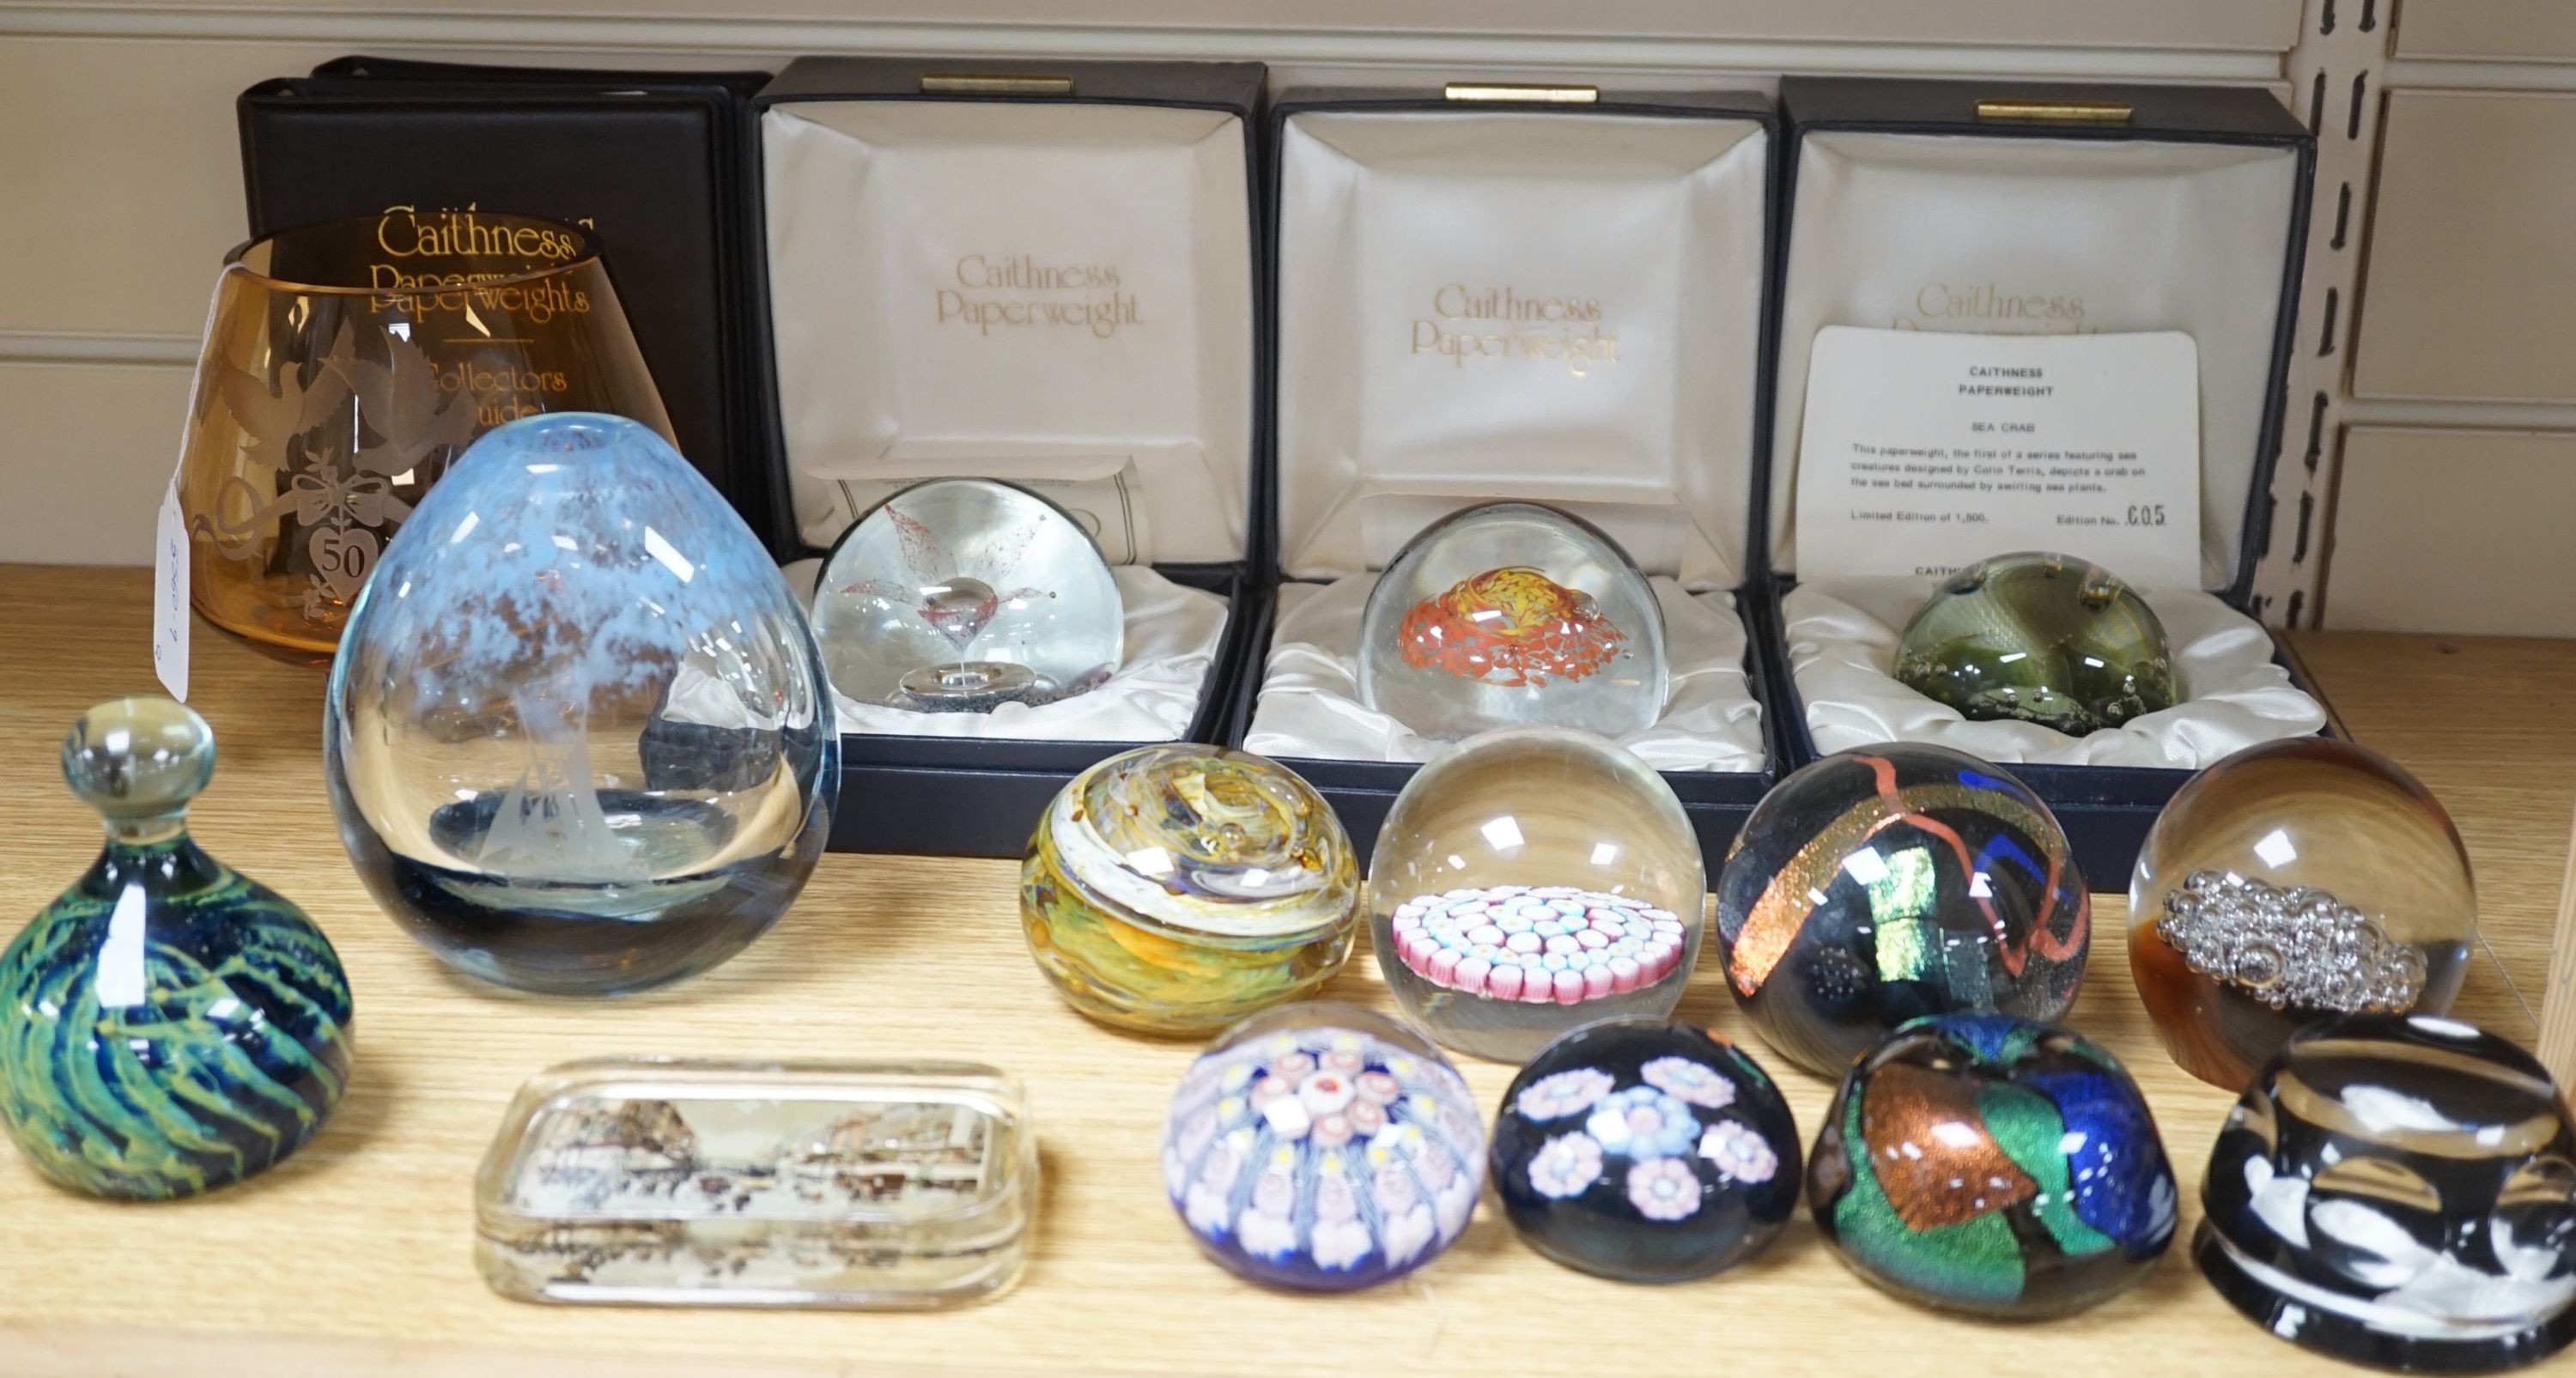 2 Caithness glass vases together with 11 various paperweights, including 3 boxed Caithness and a Baccarat paperweight.